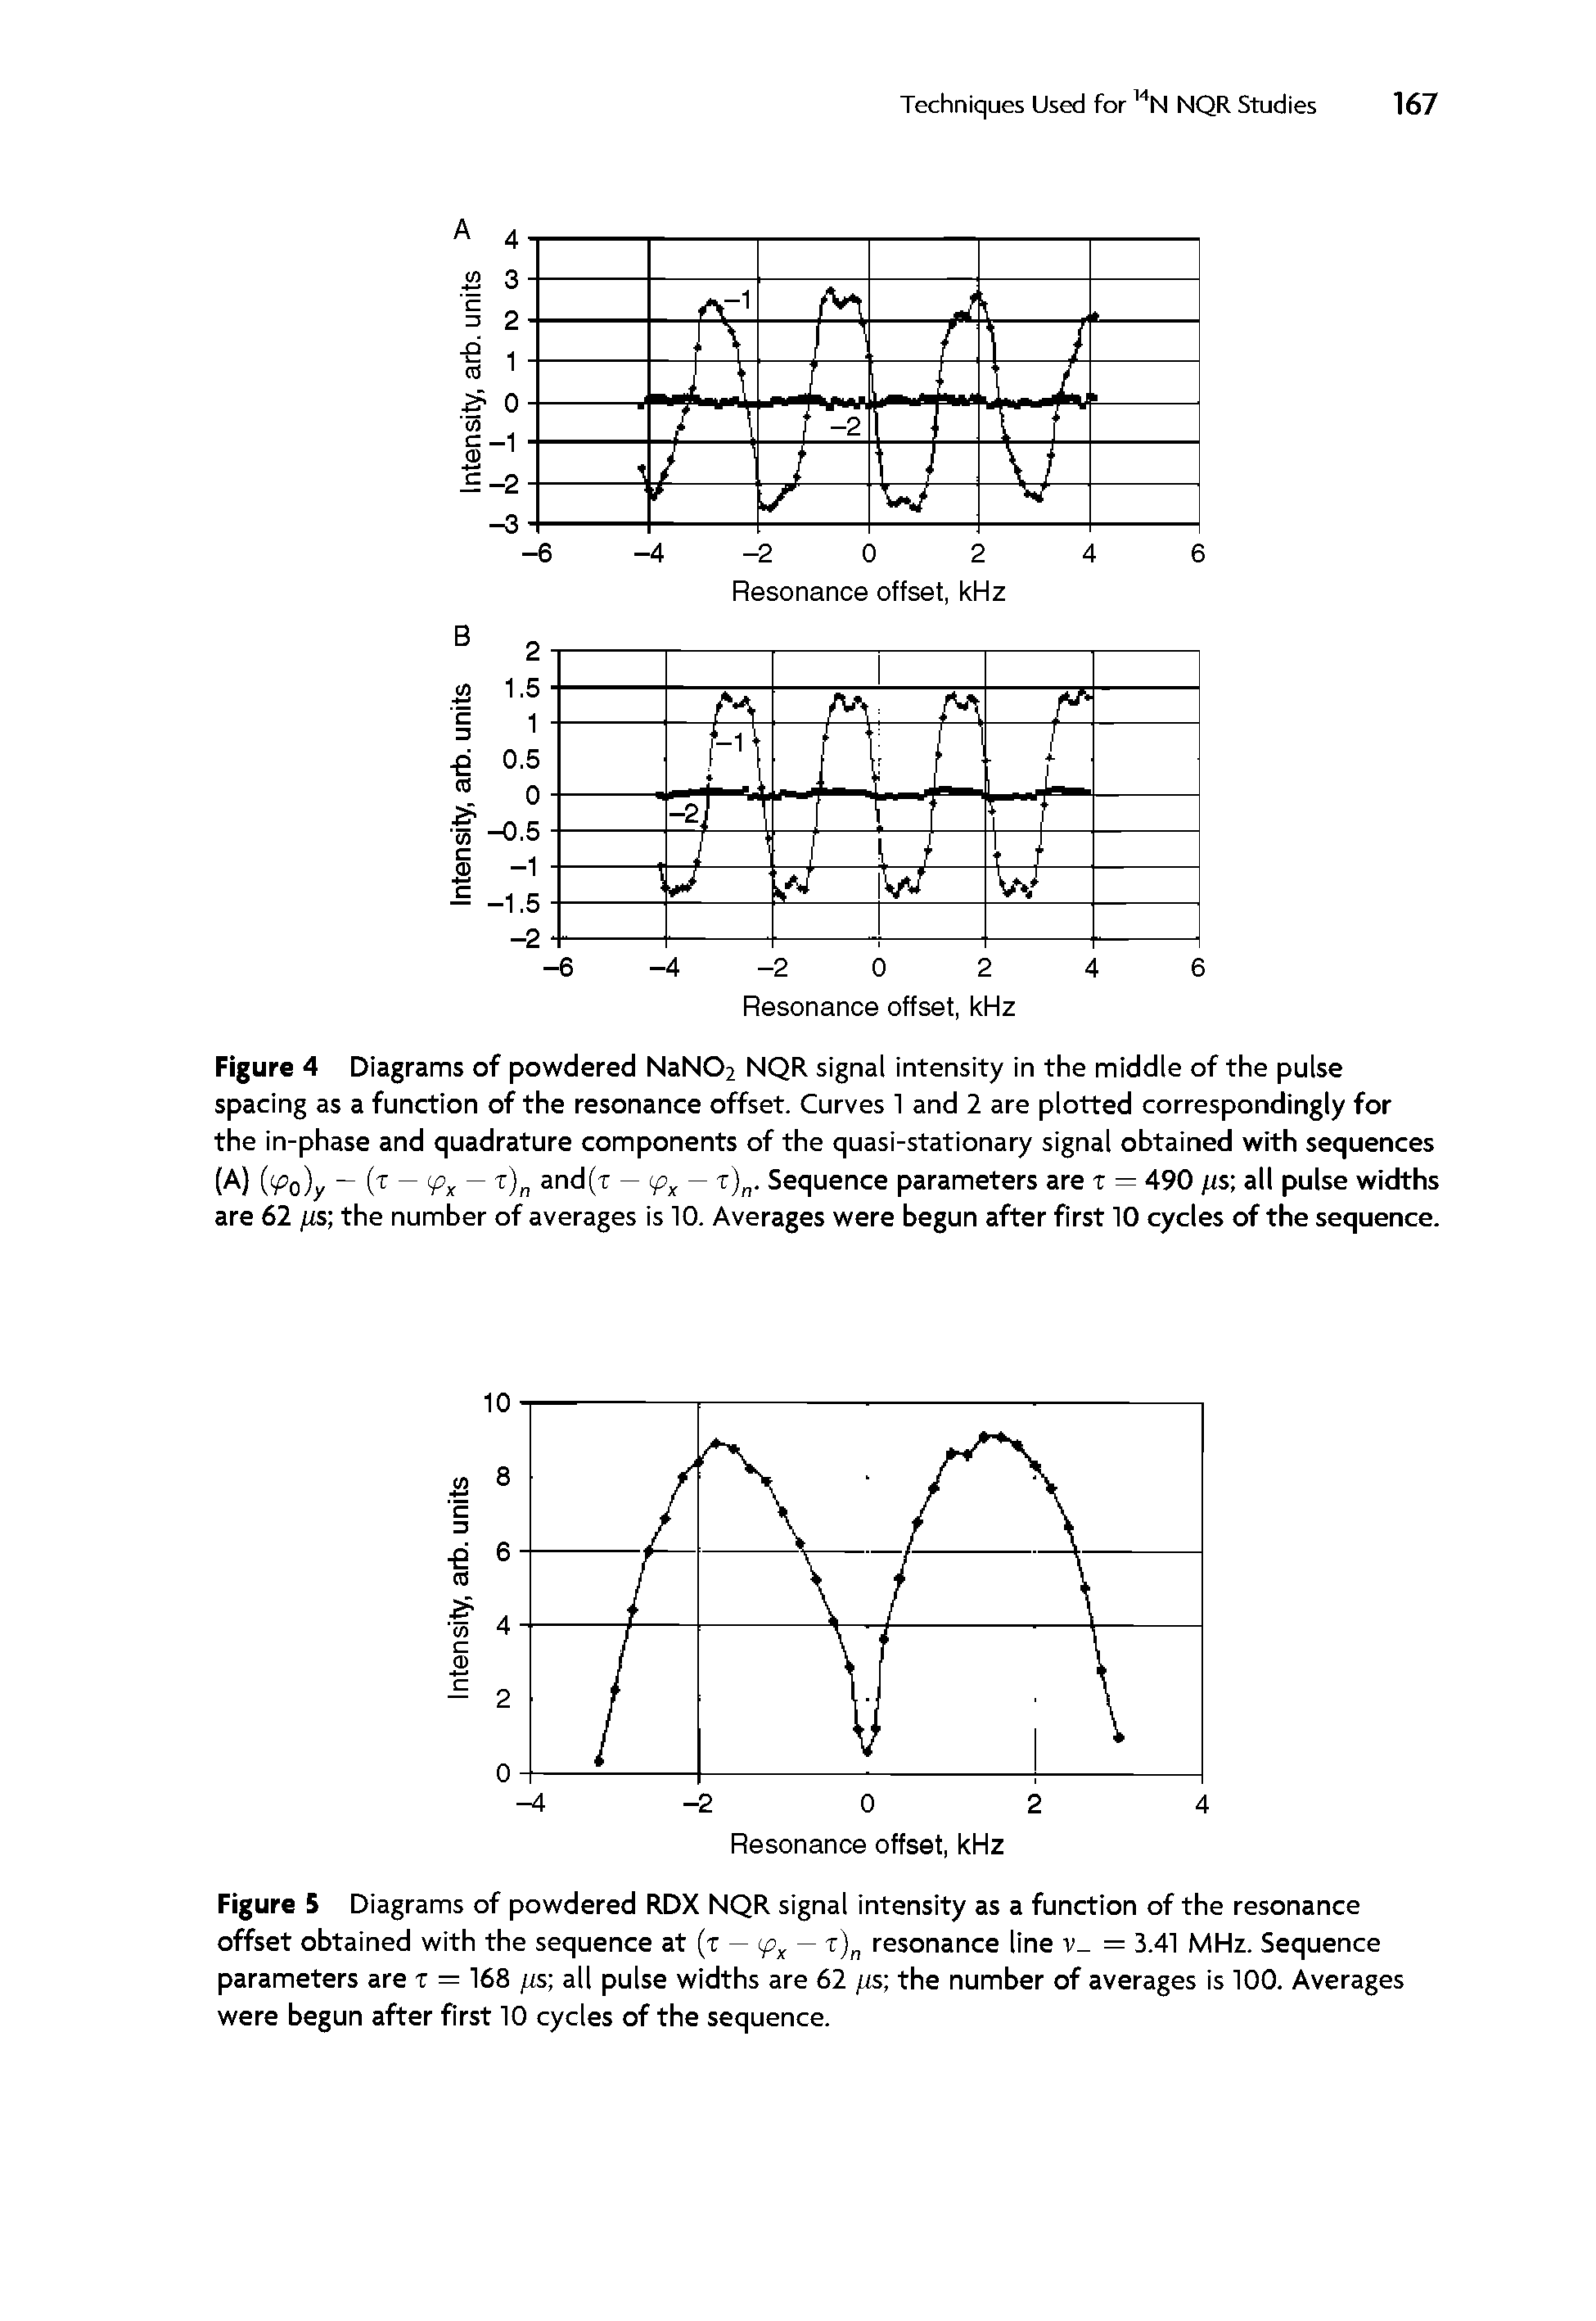 Figure 4 Diagrams of powdered NaN02 NQR signal intensity in the middle of the pulse spacing as a function of the resonance offset. Curves 1 and 2 are plotted correspondingly for the in-phase and quadrature components of the quasi-stationary signal obtained with sequences (A) (i o)y x )n and(t — — t) . Sequence parameters are t = 490 /ts all pulse widths...